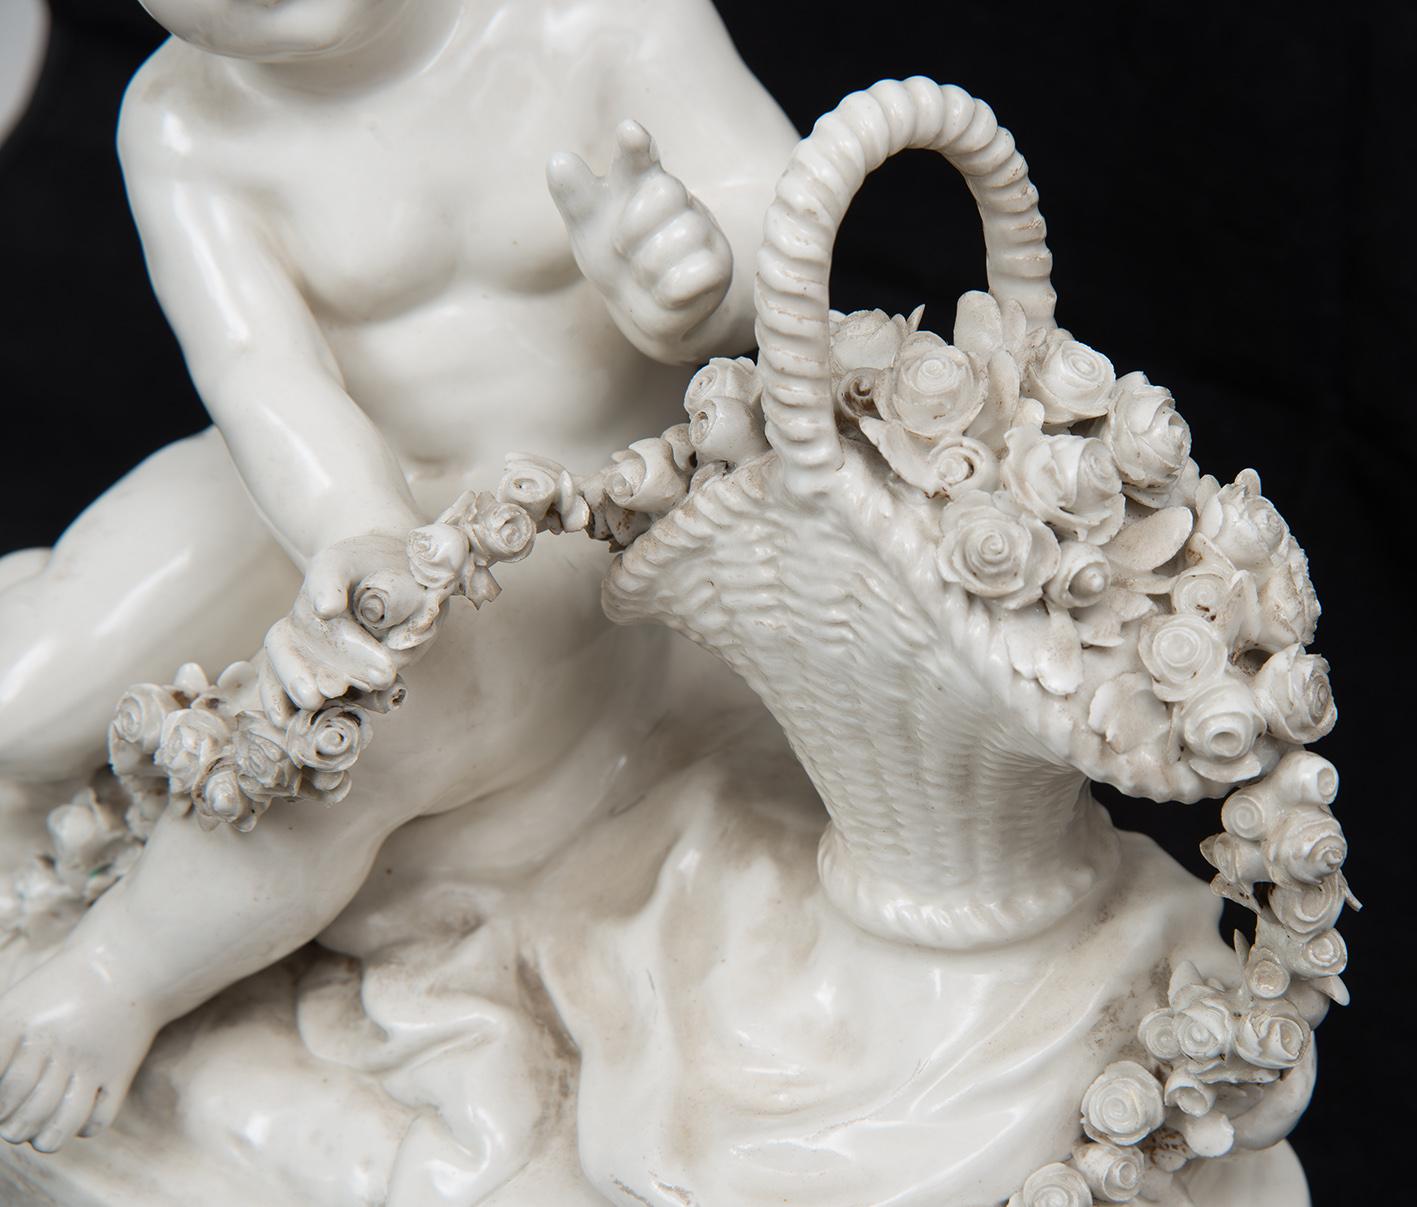 Capodimonte porcelain sculptural group belonging to the early 20th century.

The group depicts a putto in a romantic attitude while holding a wreath.

The fineness of the carving and composition of the work places it between the first and second